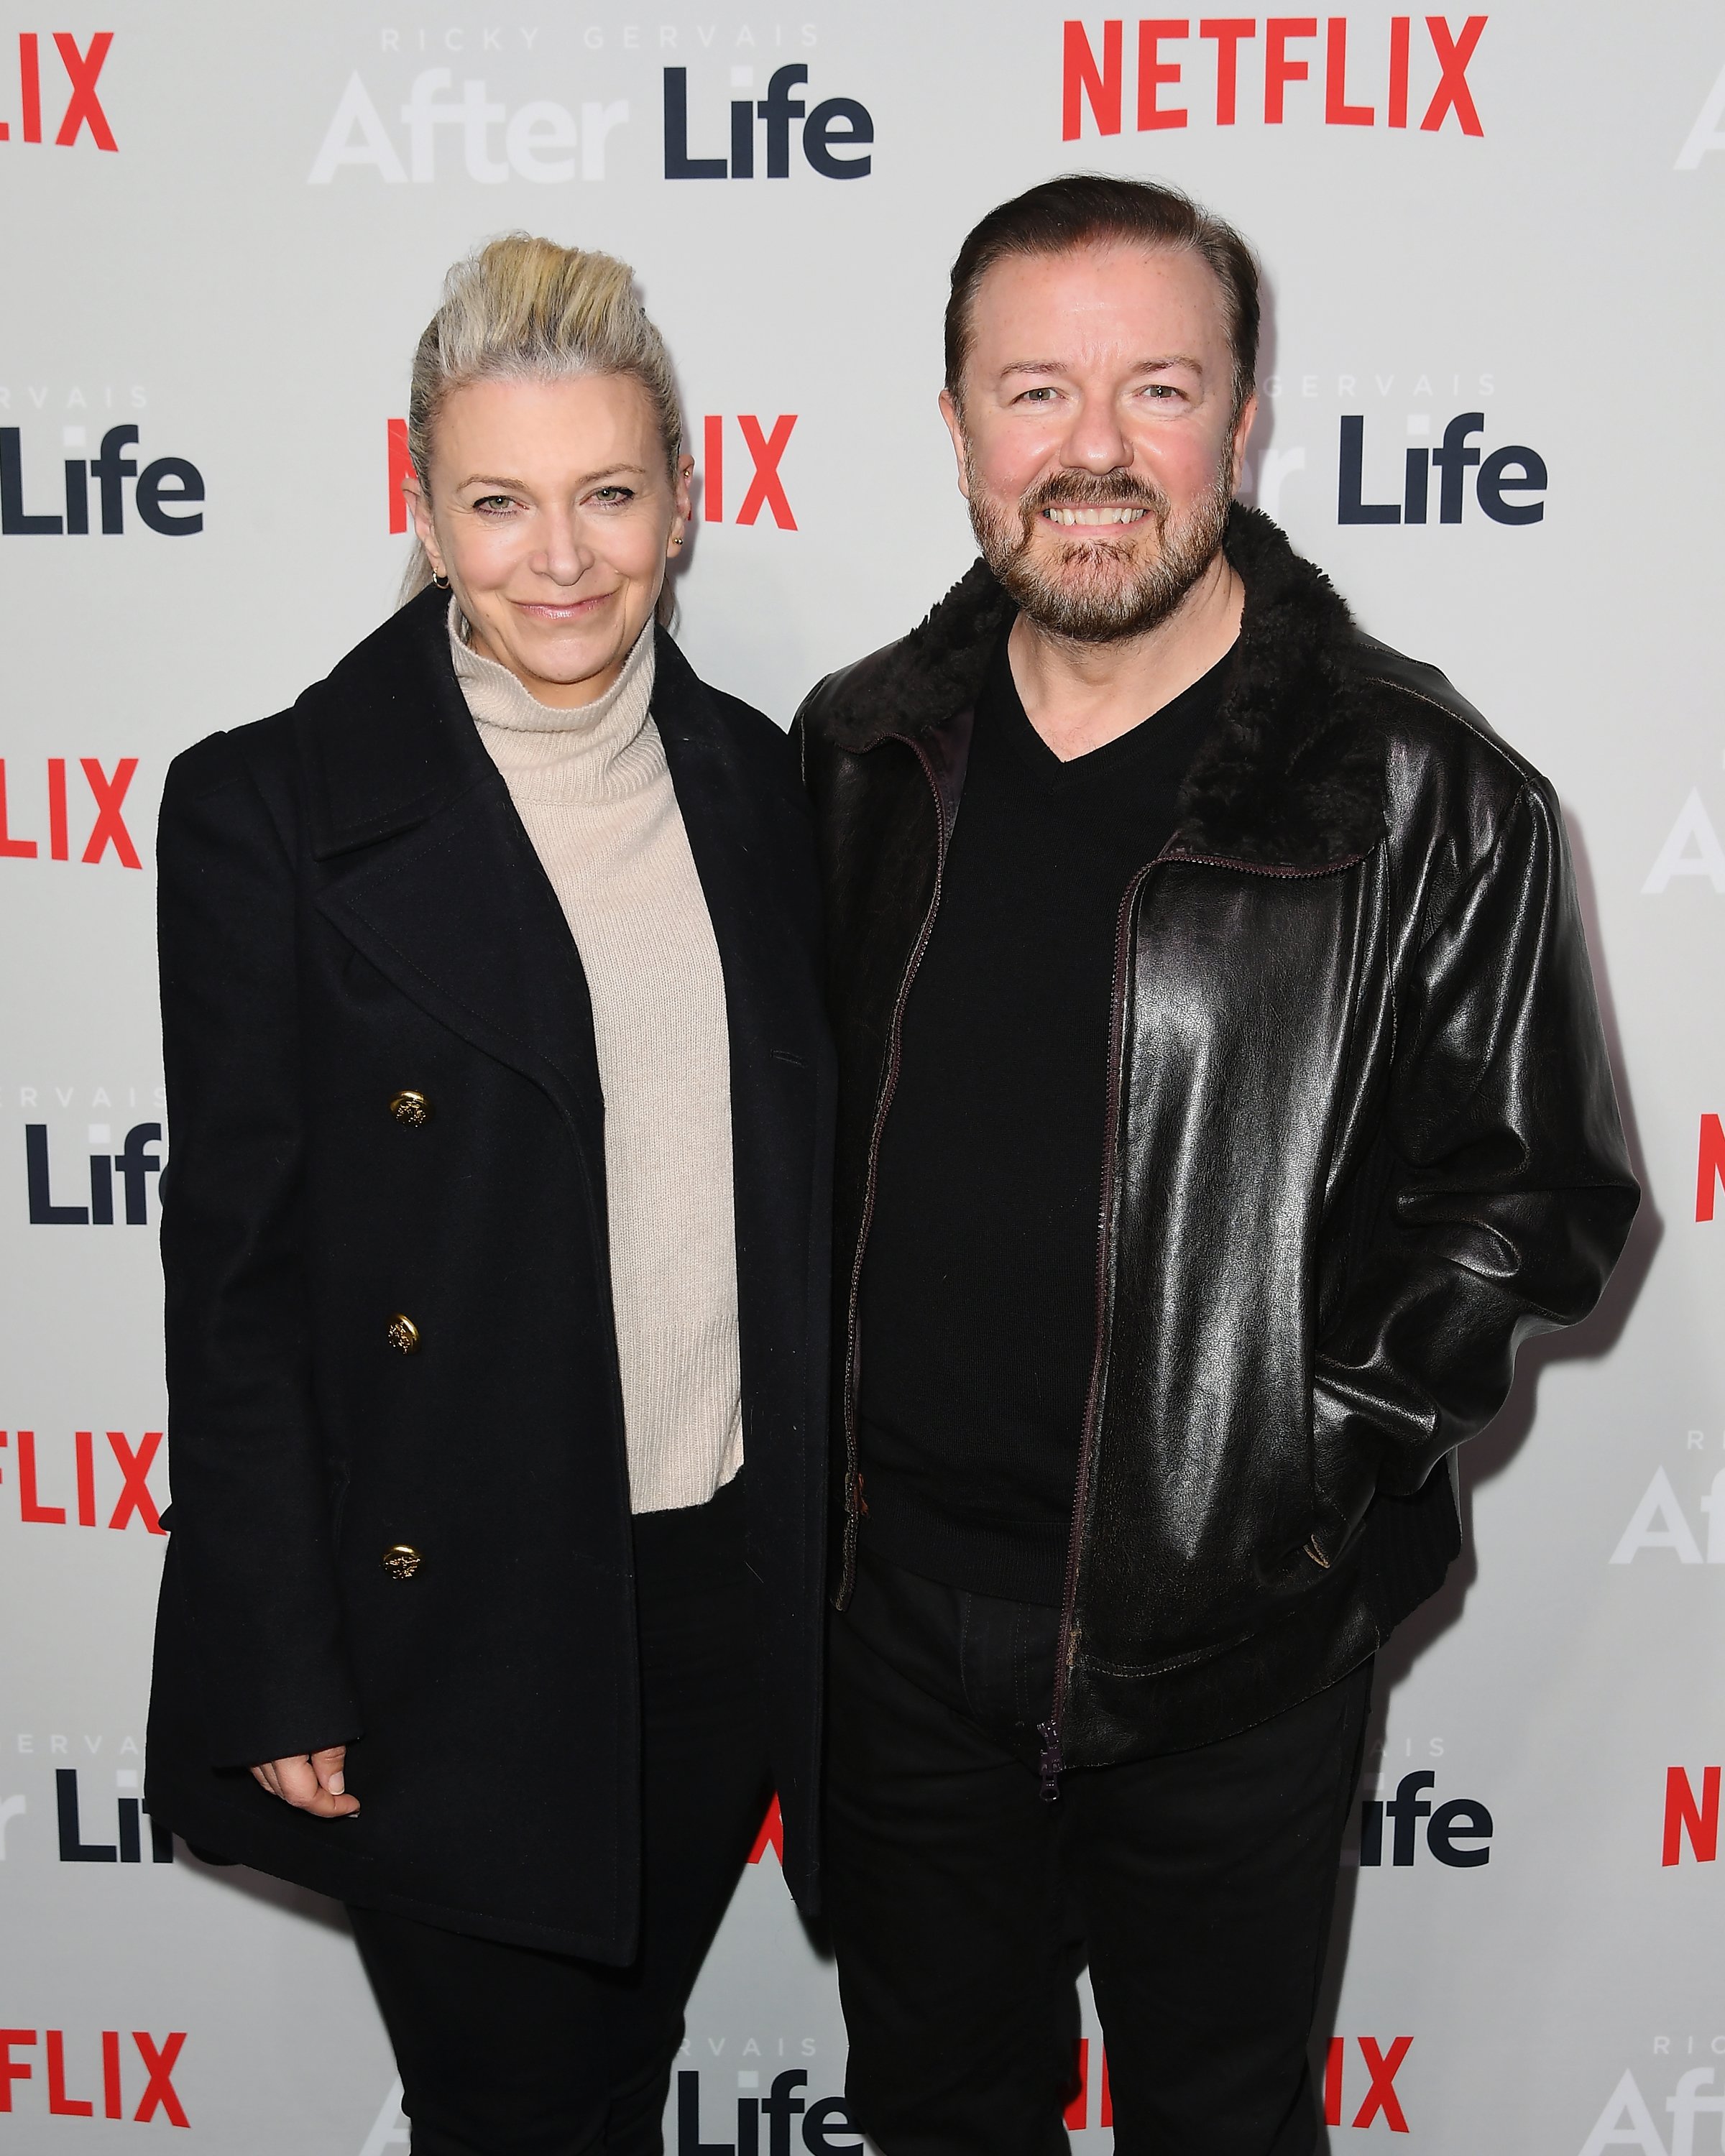 Jane Fallon and comedian Ricky Gervais attends the "After Life" For Your Consideration Event on March 7, 2019 in New York City. | Source: Getty Images